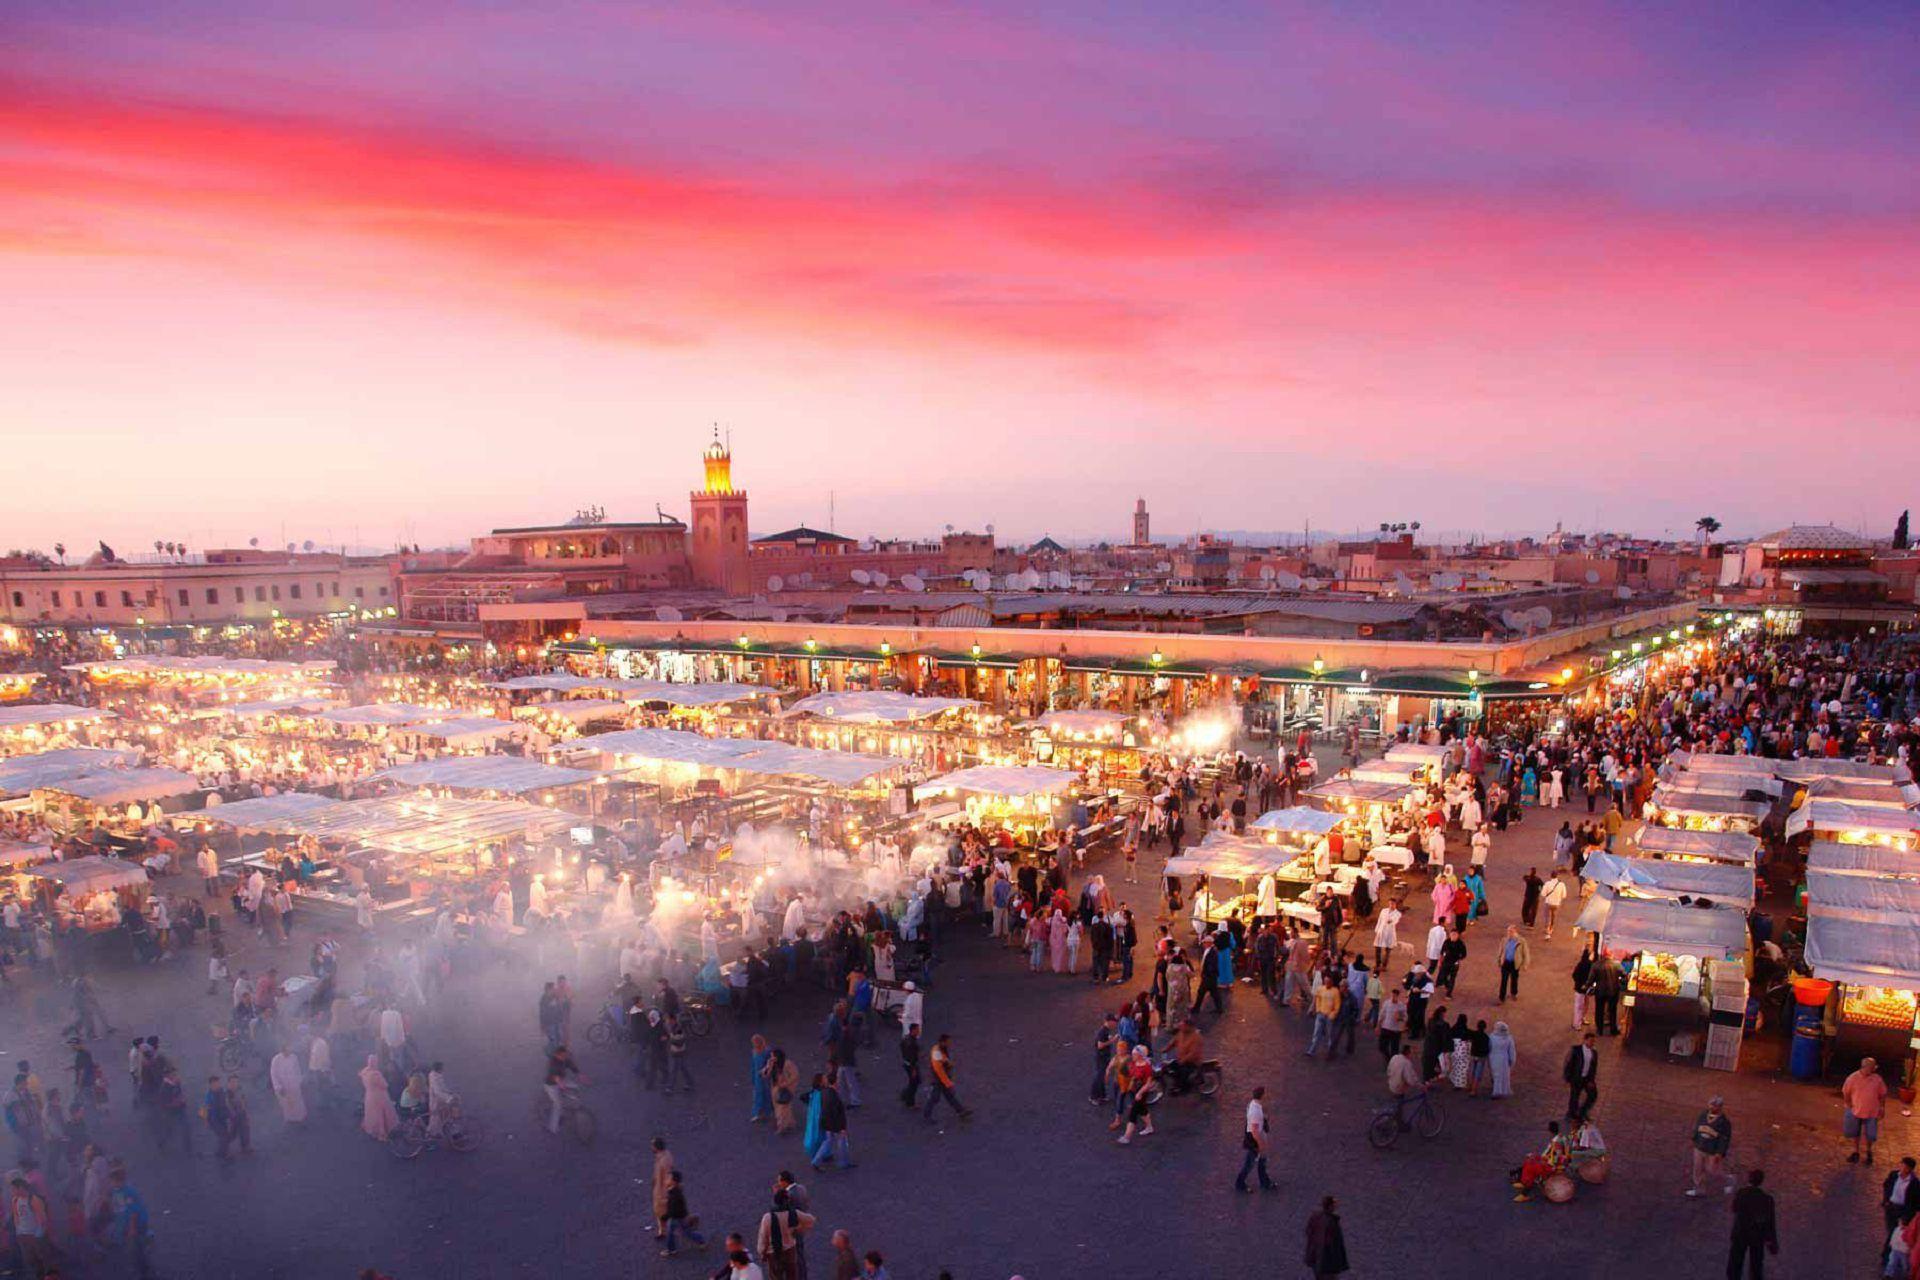 Marrakech is the best travel destination in the world